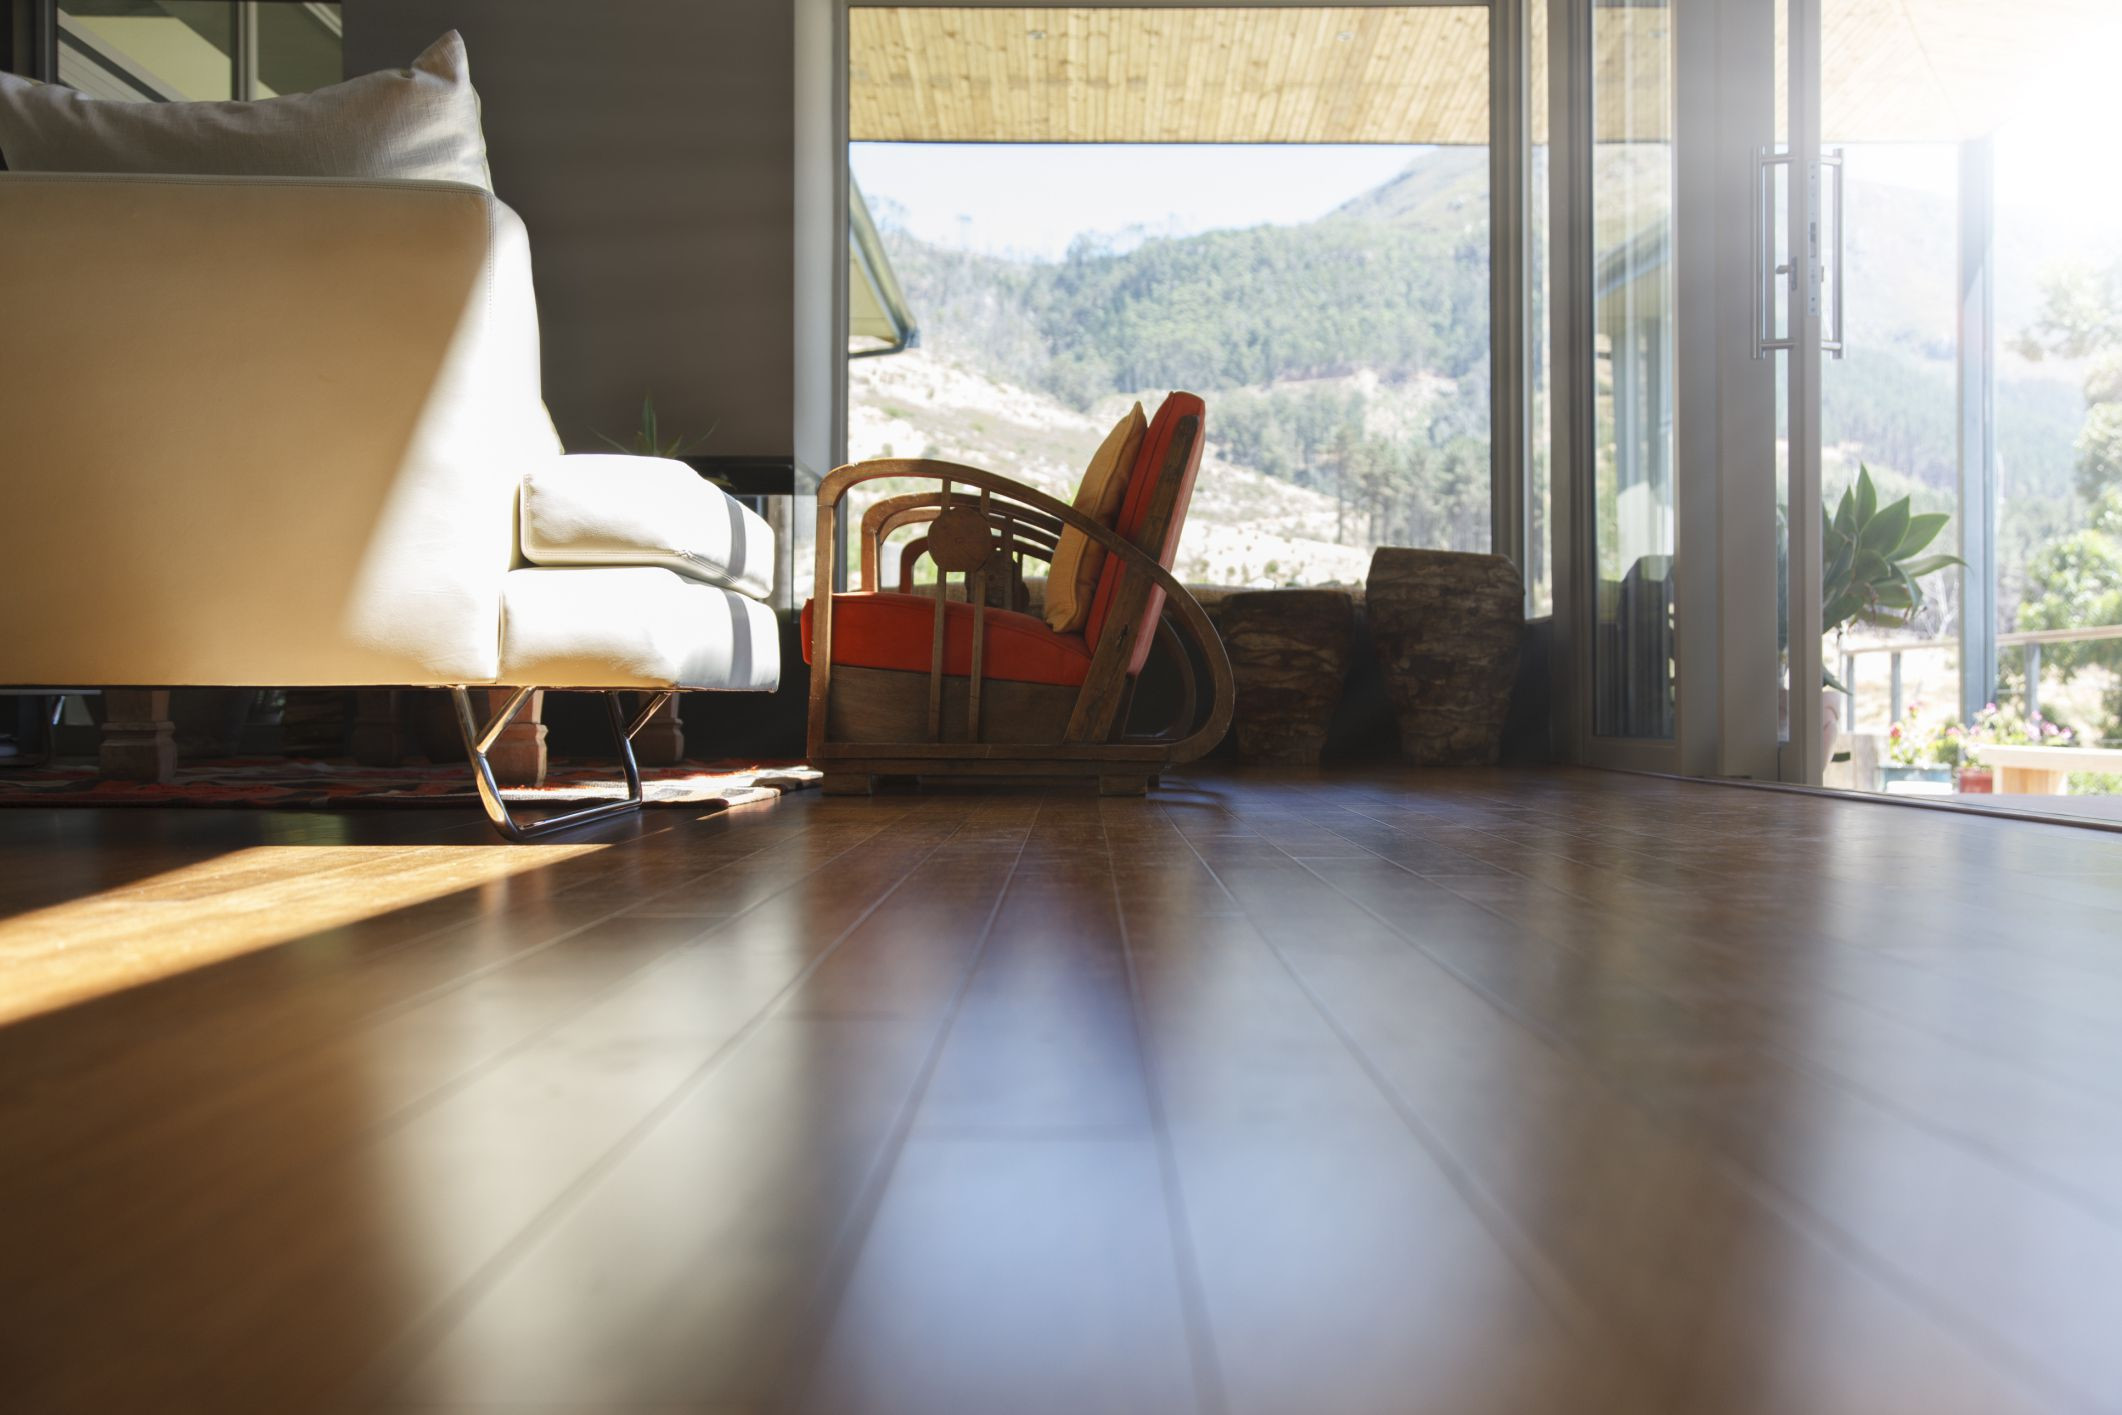 hardwood flooring home depot vs lowes of pros and cons of bellawood flooring from lumber liquidators with regard to exotic hardwood flooring 525439899 56a49d3a3df78cf77283453d